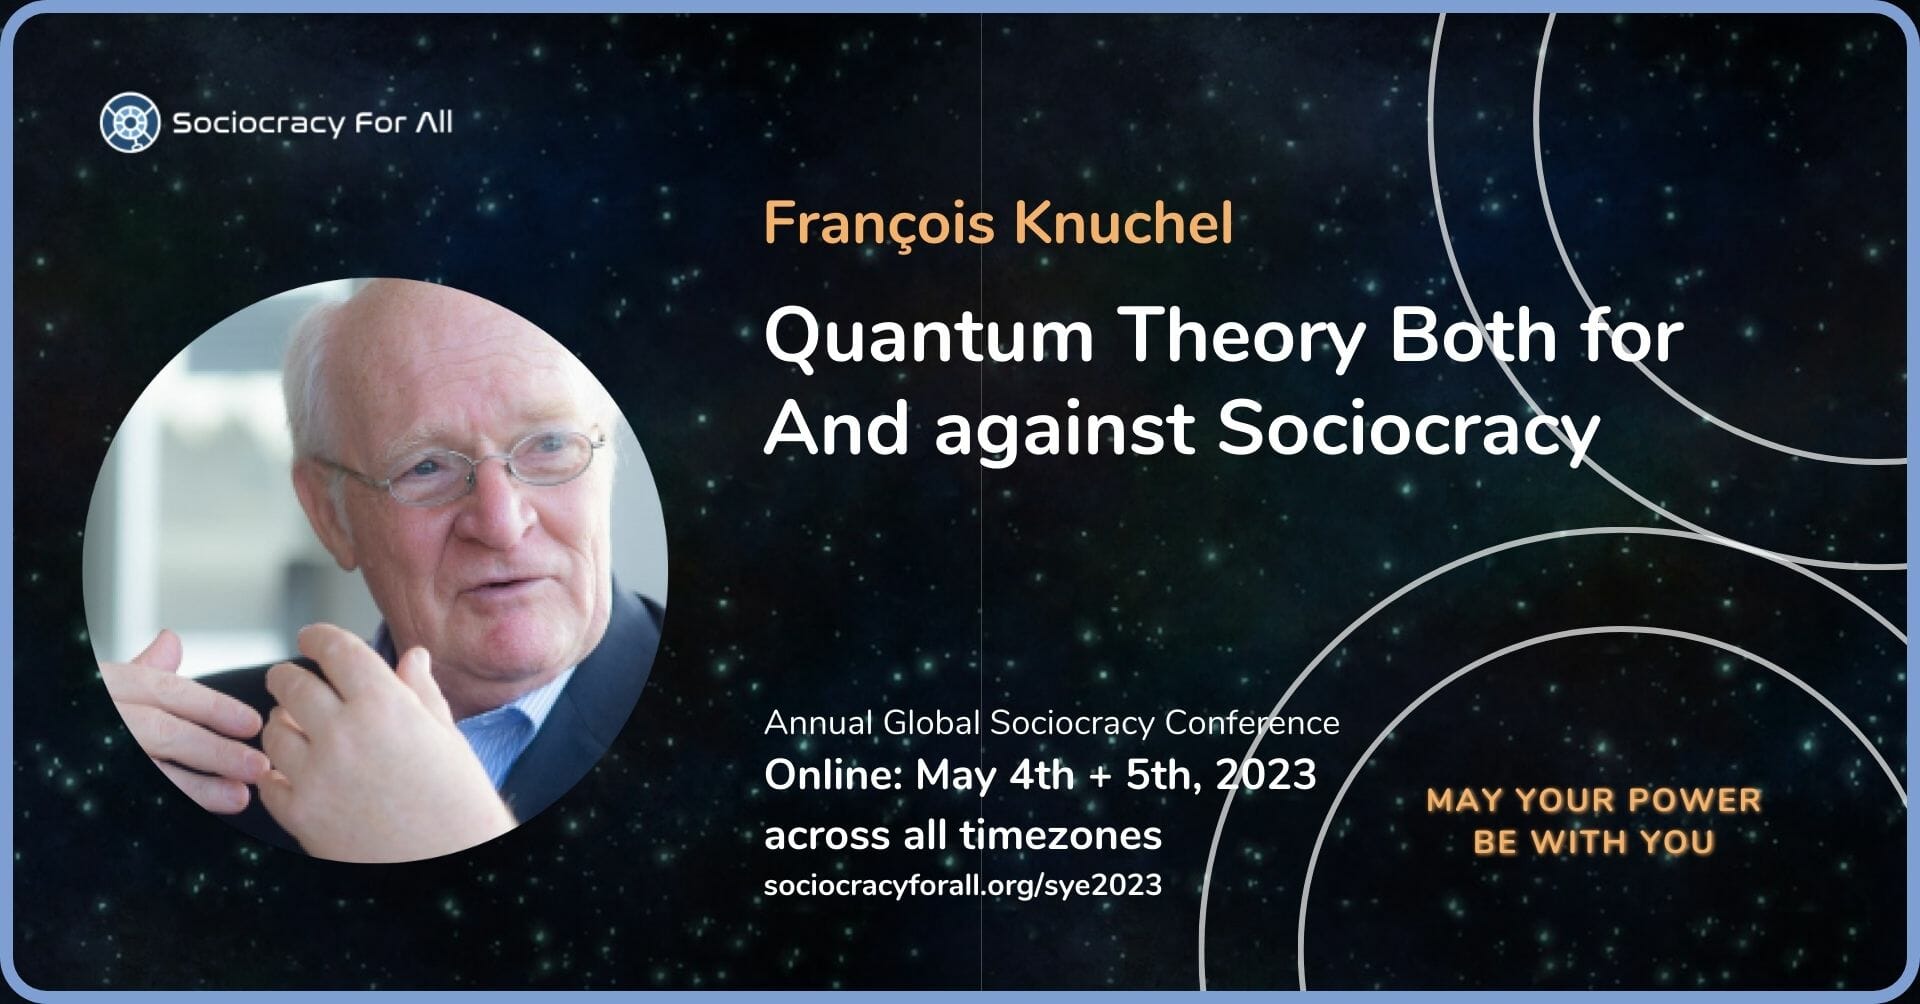 Quantum Theory Both for And against Sociocracy